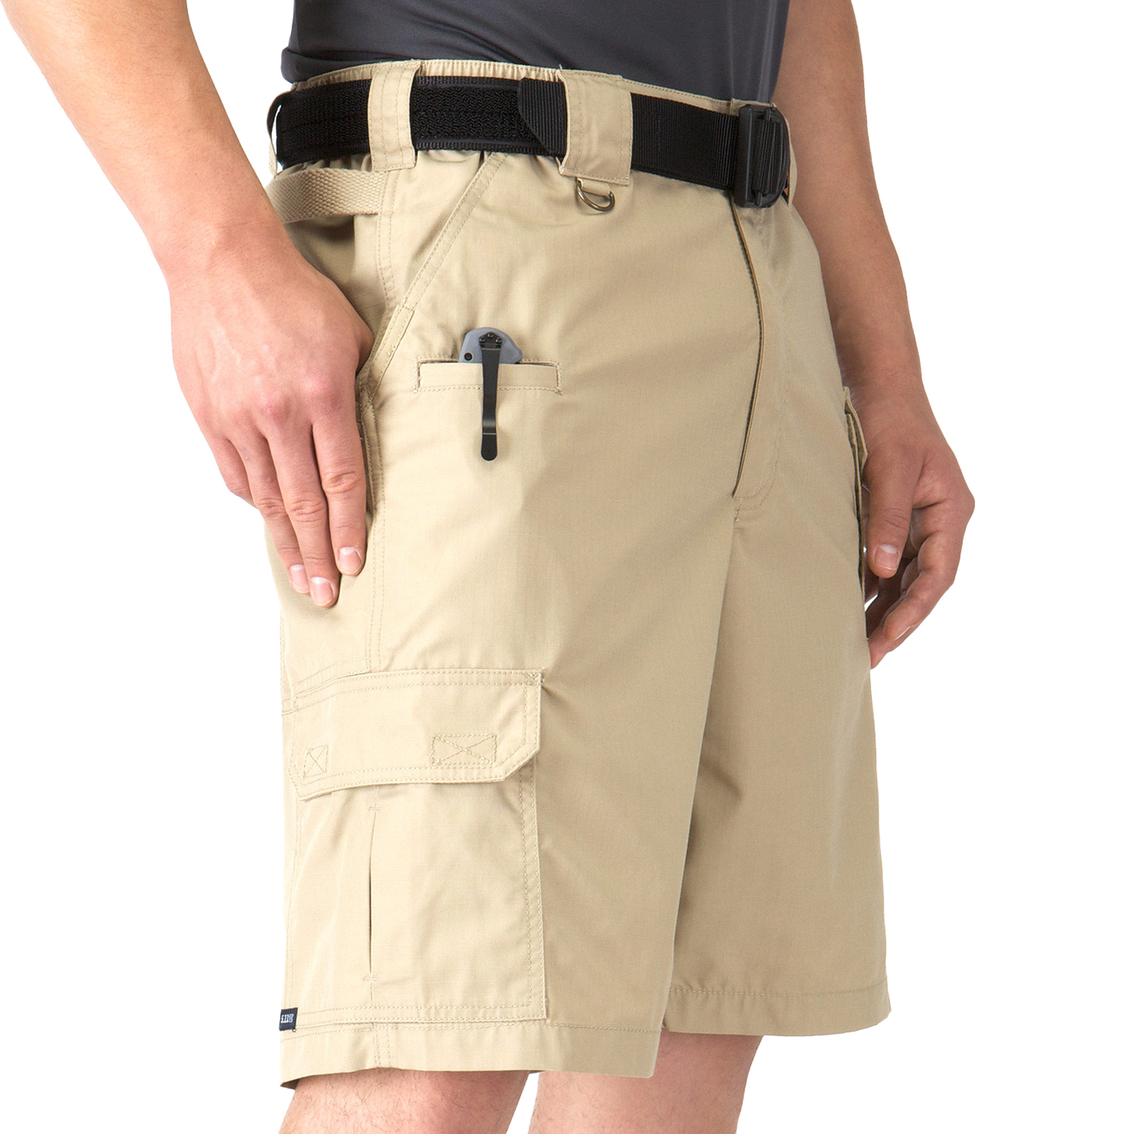 5.11 Taclite Pro 11 in. Shorts - Image 3 of 3